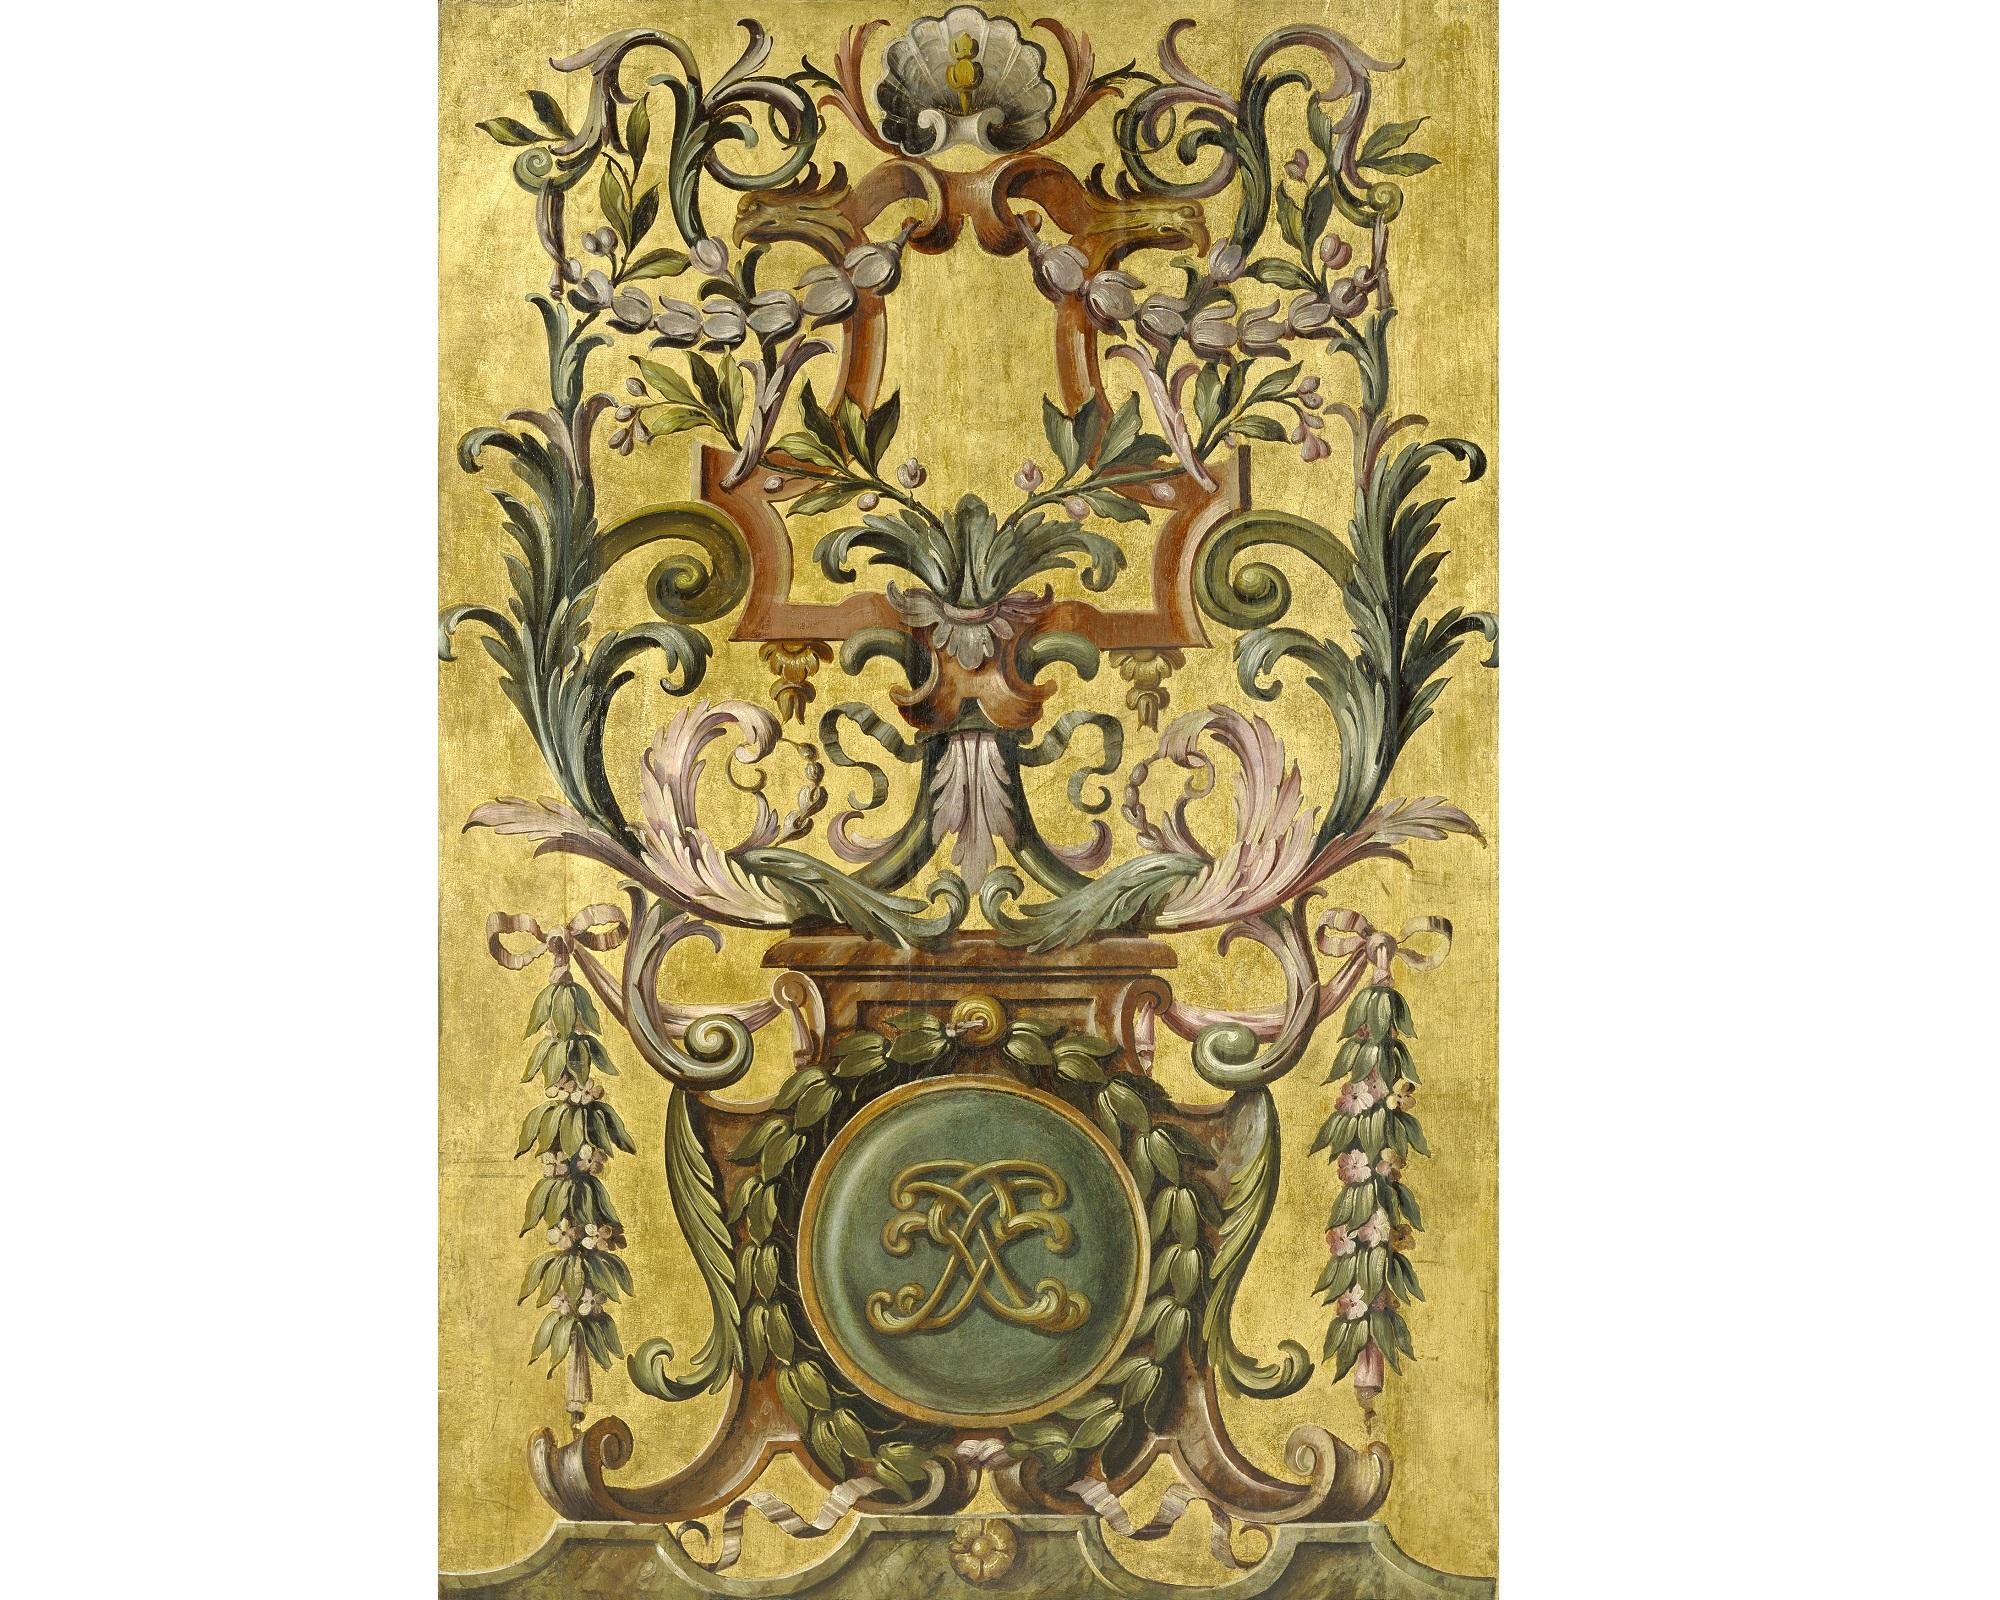 Fine Art French Chateau Panel, after Oil Painting by French Empire Artist In Excellent Condition For Sale In Fairhope, AL